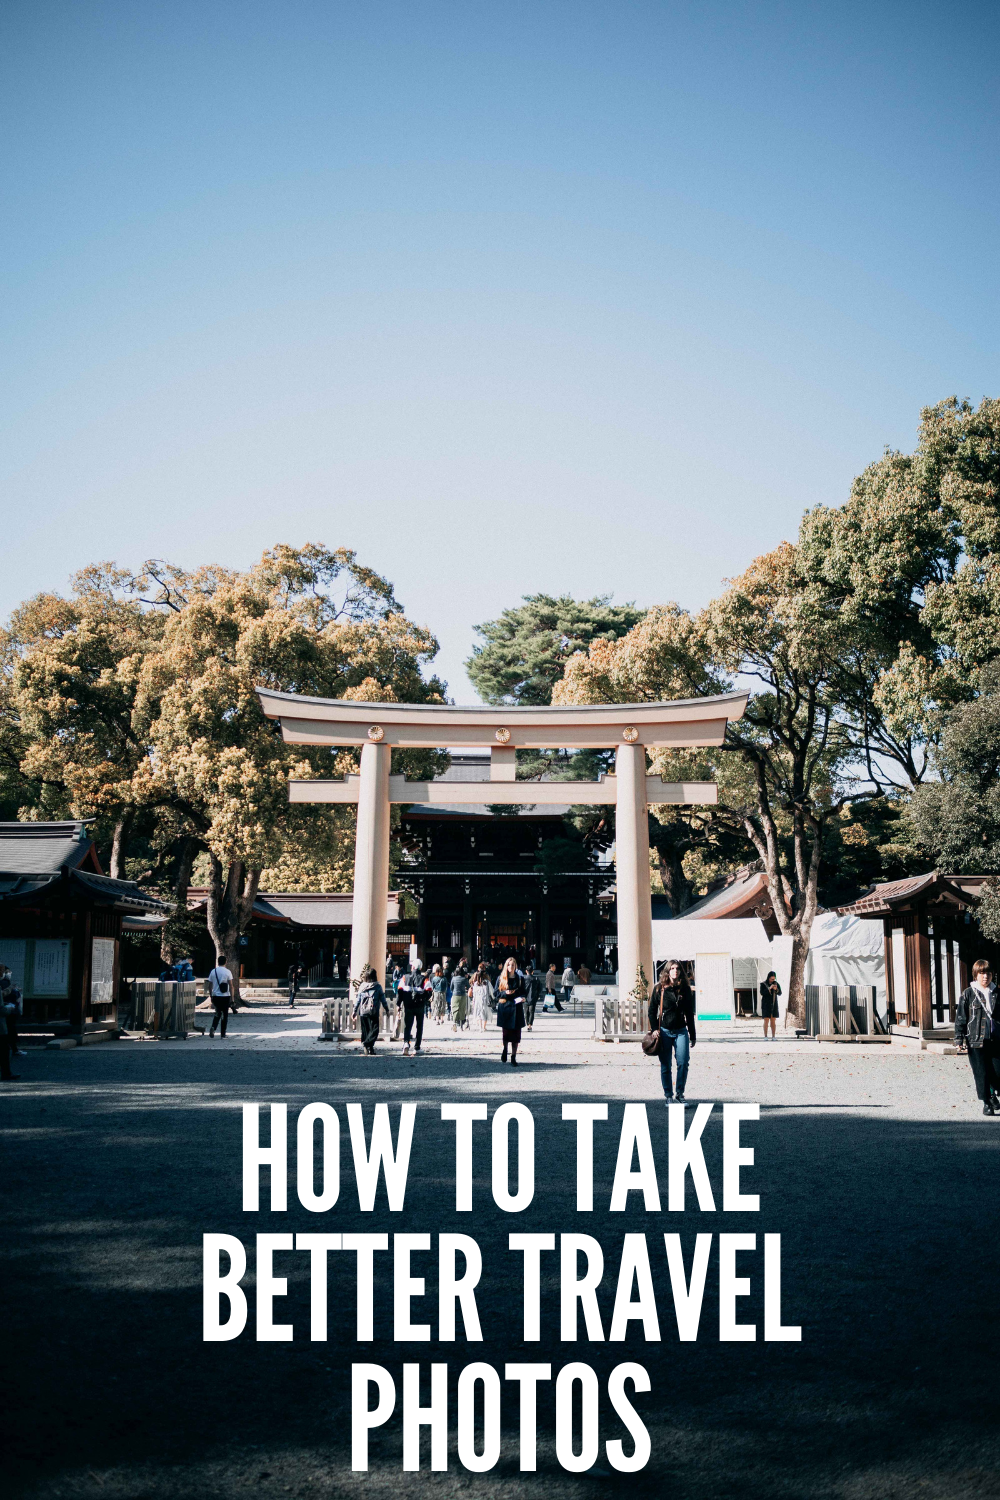 How to take better travel photos